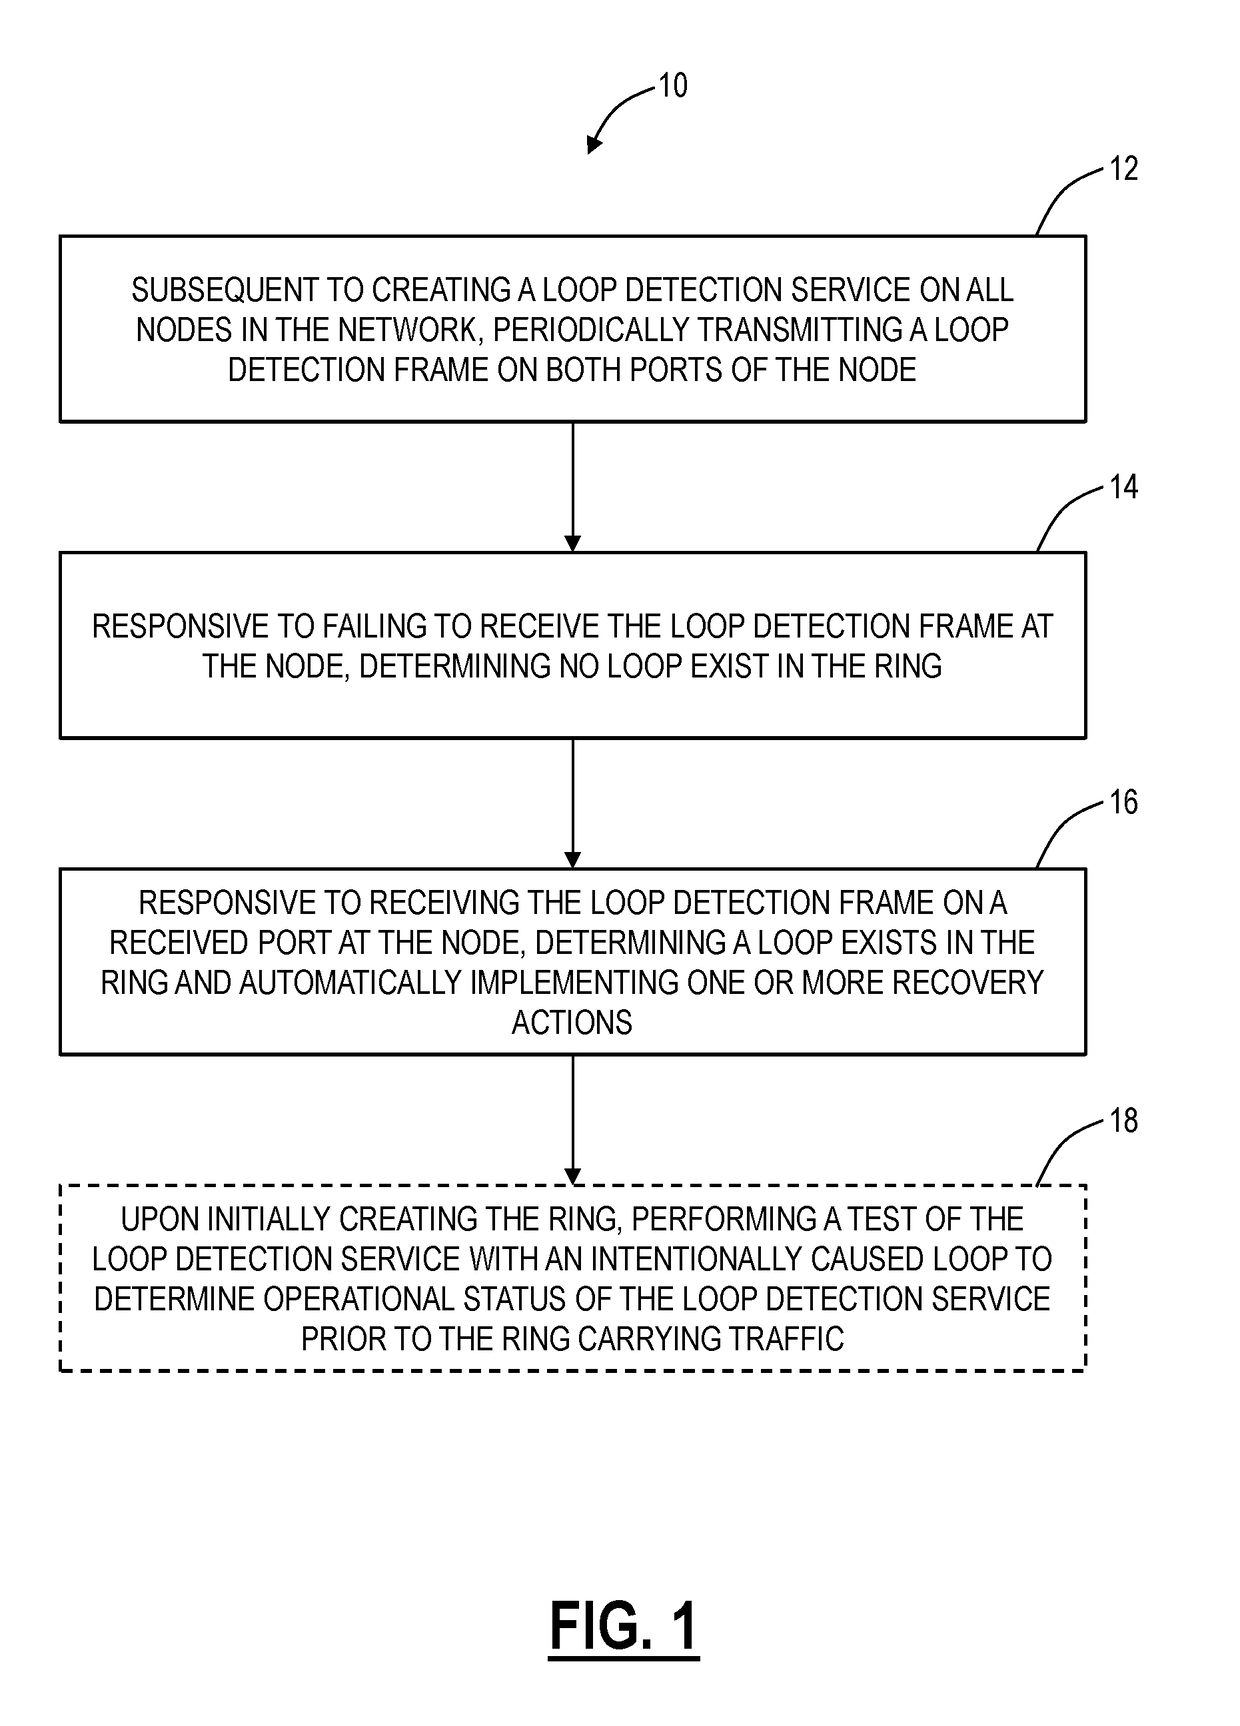 Systems and methods to detect and recover from a loop in an ethernet ring protected network